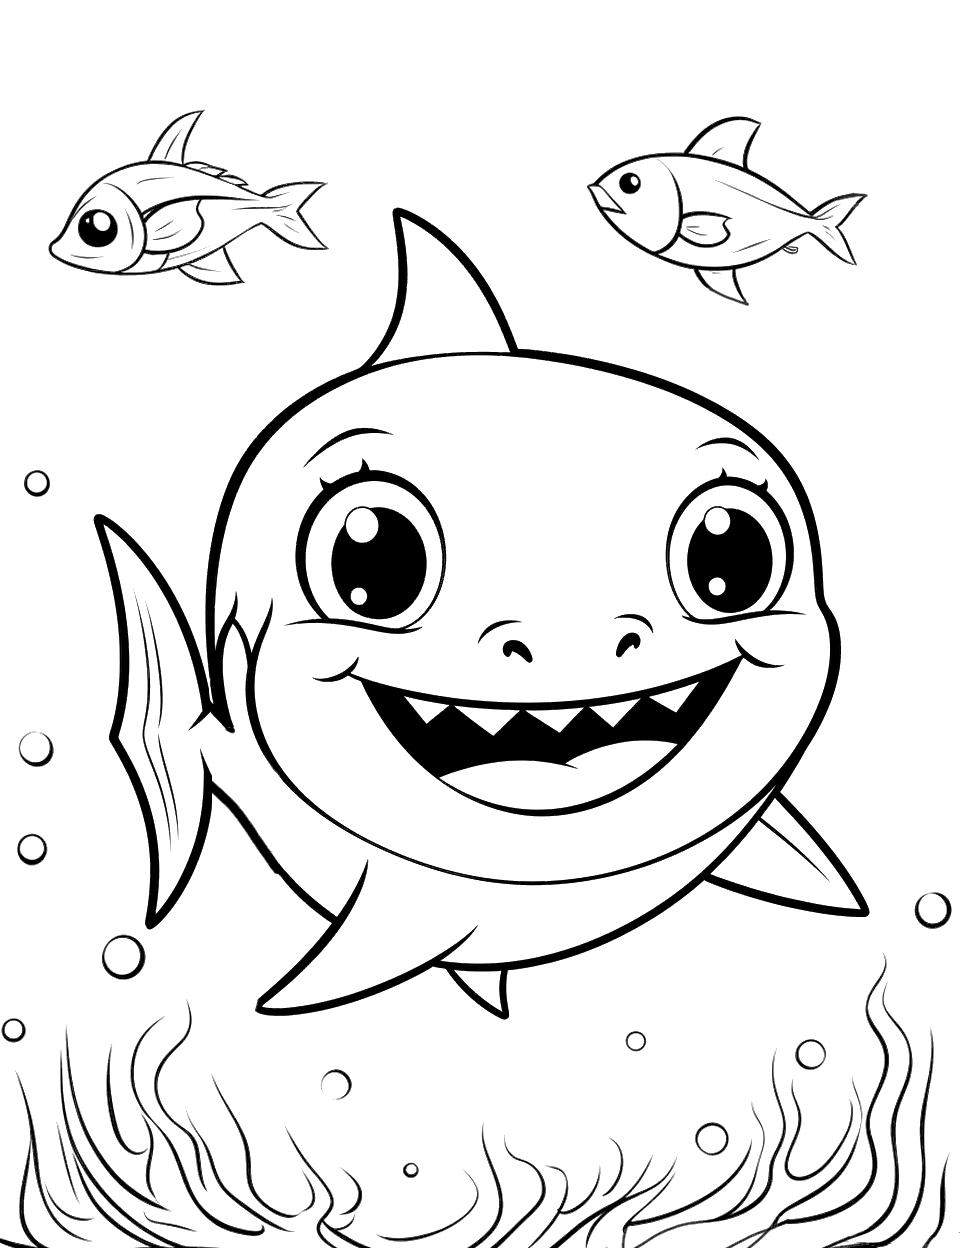 Baby Shark and Fish Coloring Page - Baby Shark making friends with small fishes in the ocean.